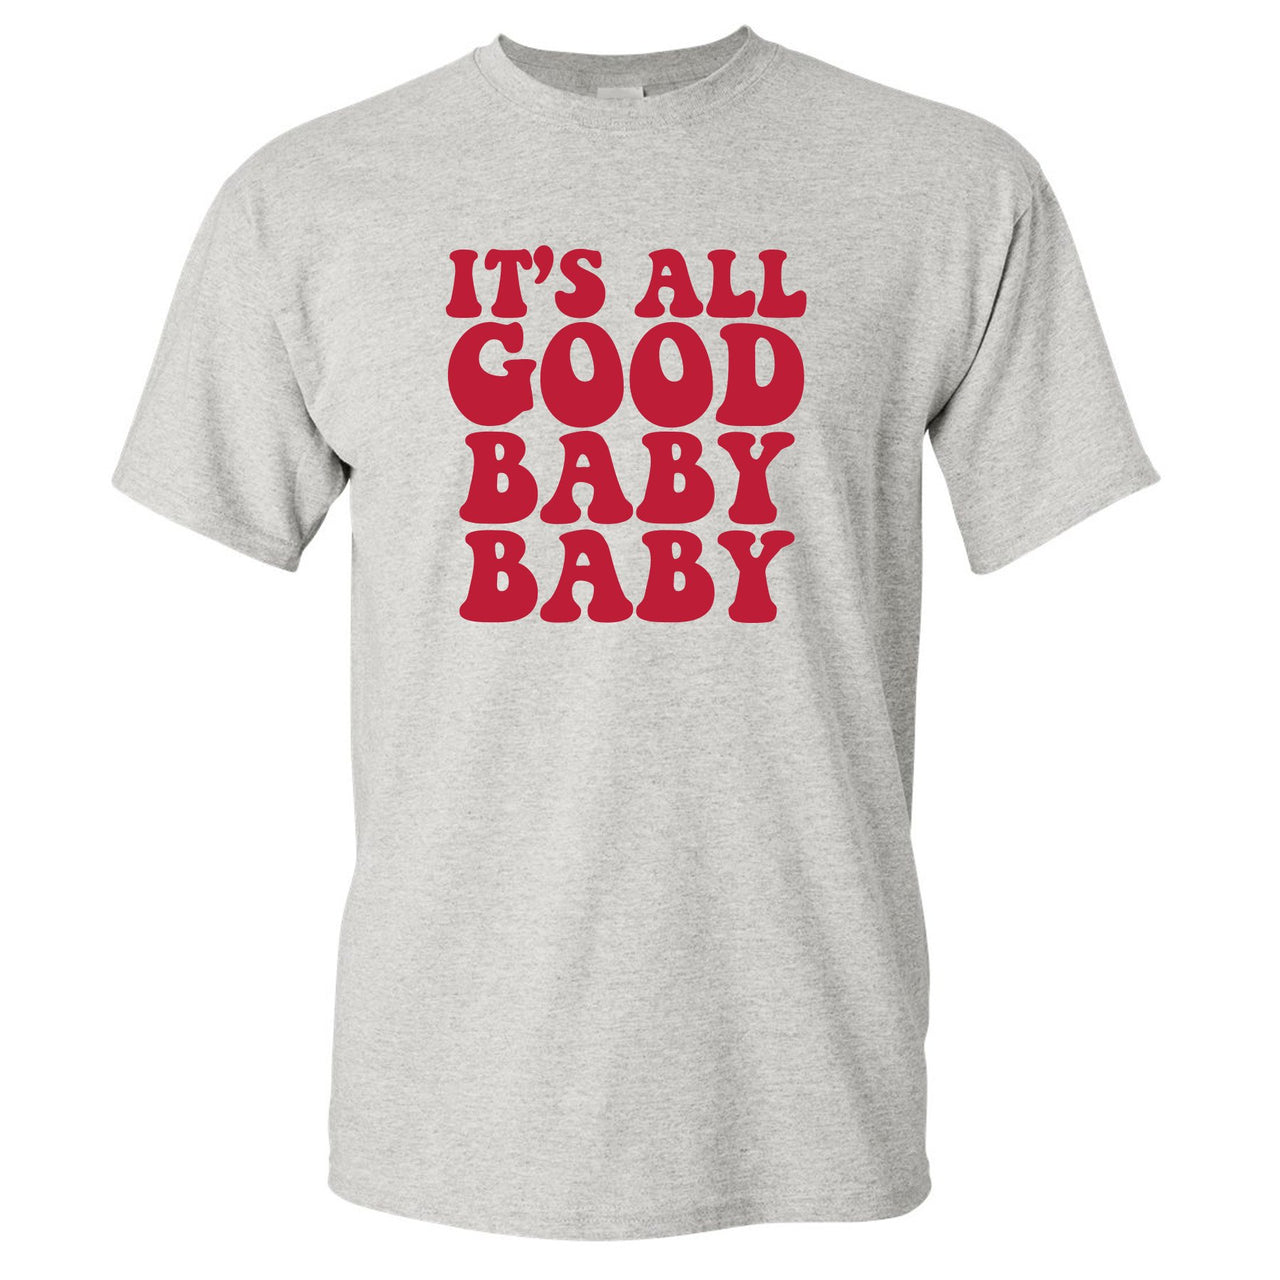 Reflections of a Champion 8s T Shirt | It's All Good Baby Baby, Sports Gray